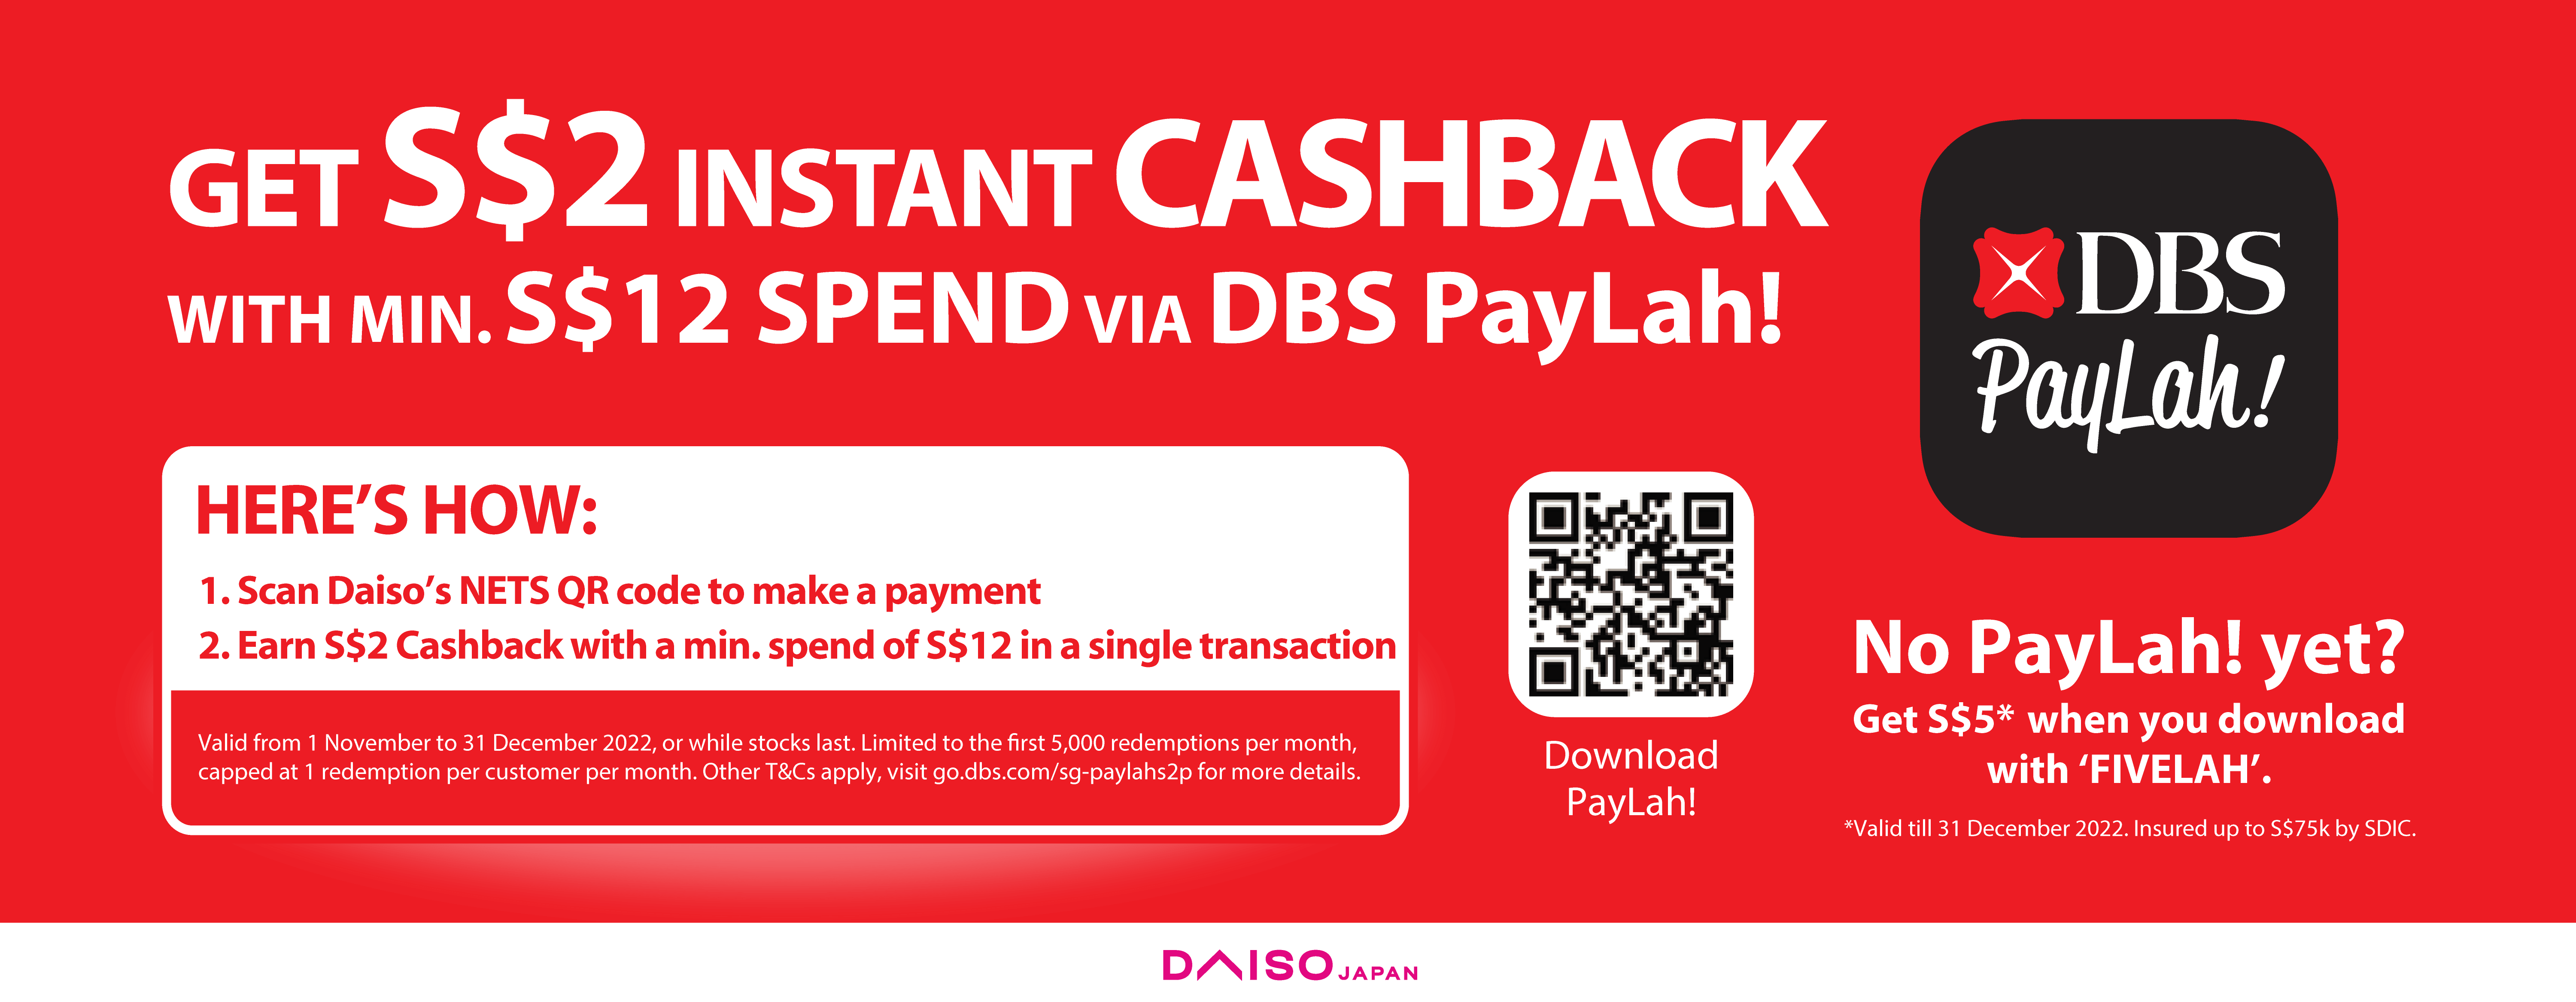 DBS PayLah! Promotion